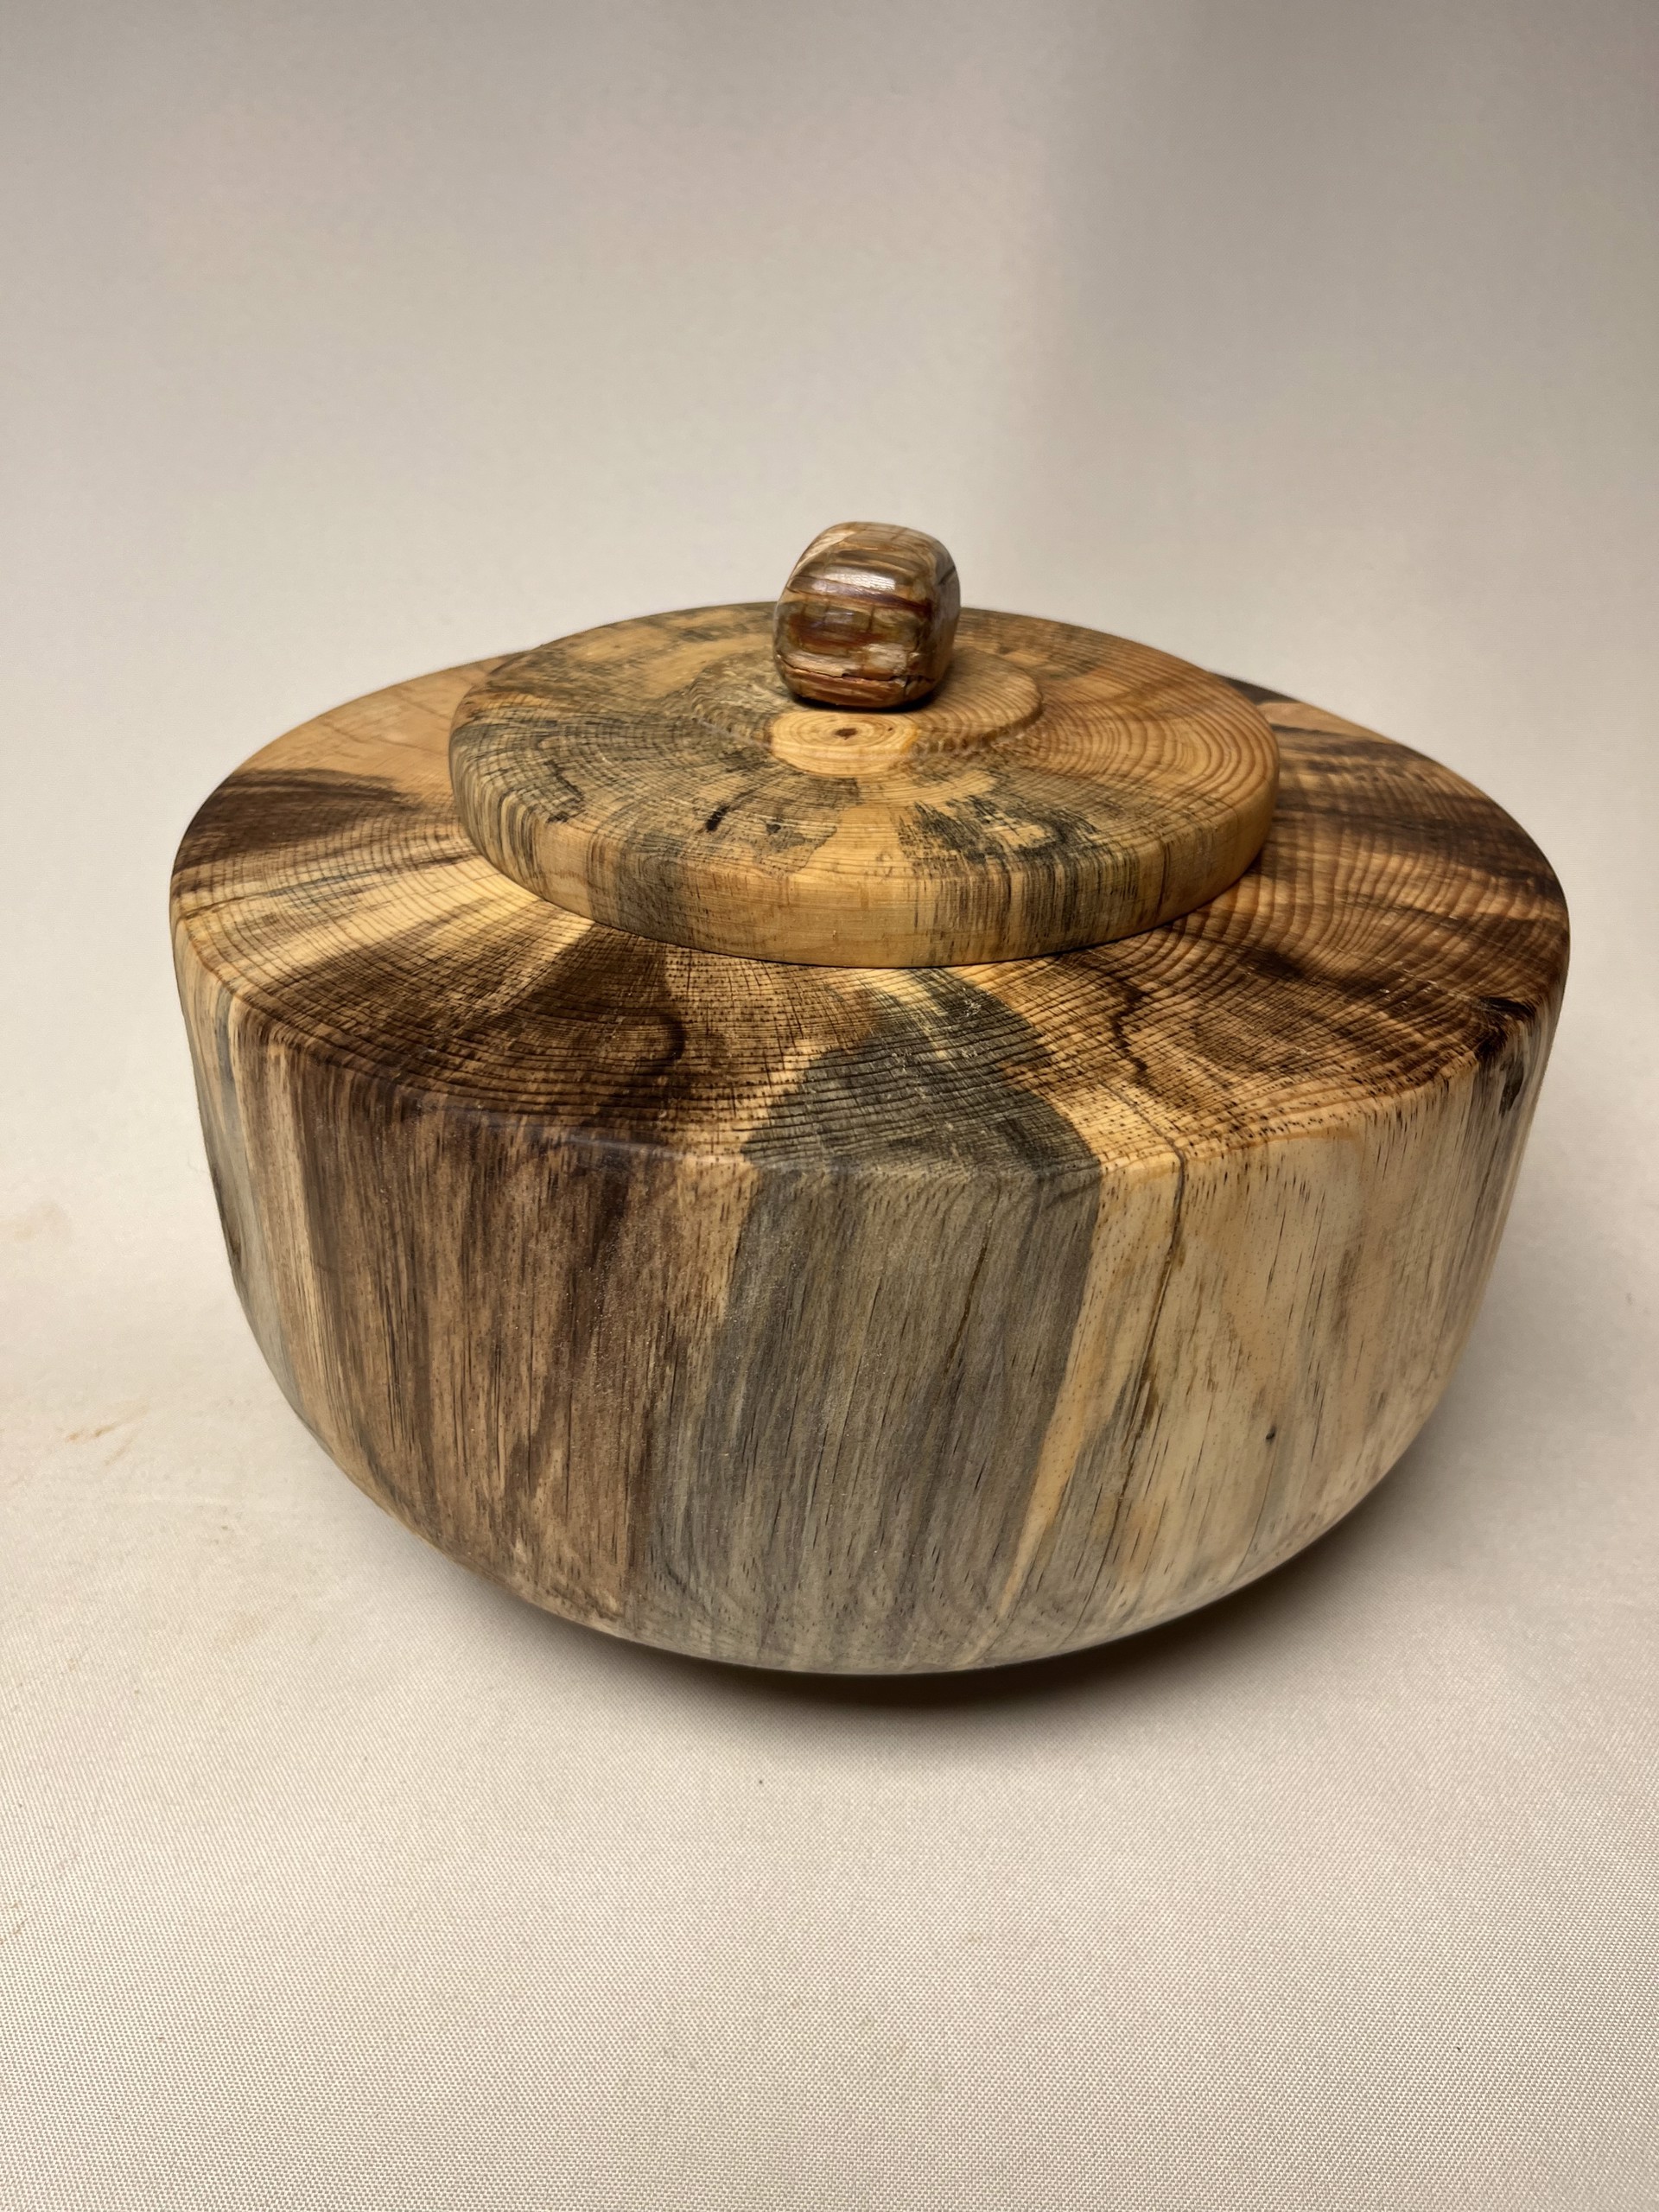 Turned Wood Jar W/Lid #22-71 by Rick Squires